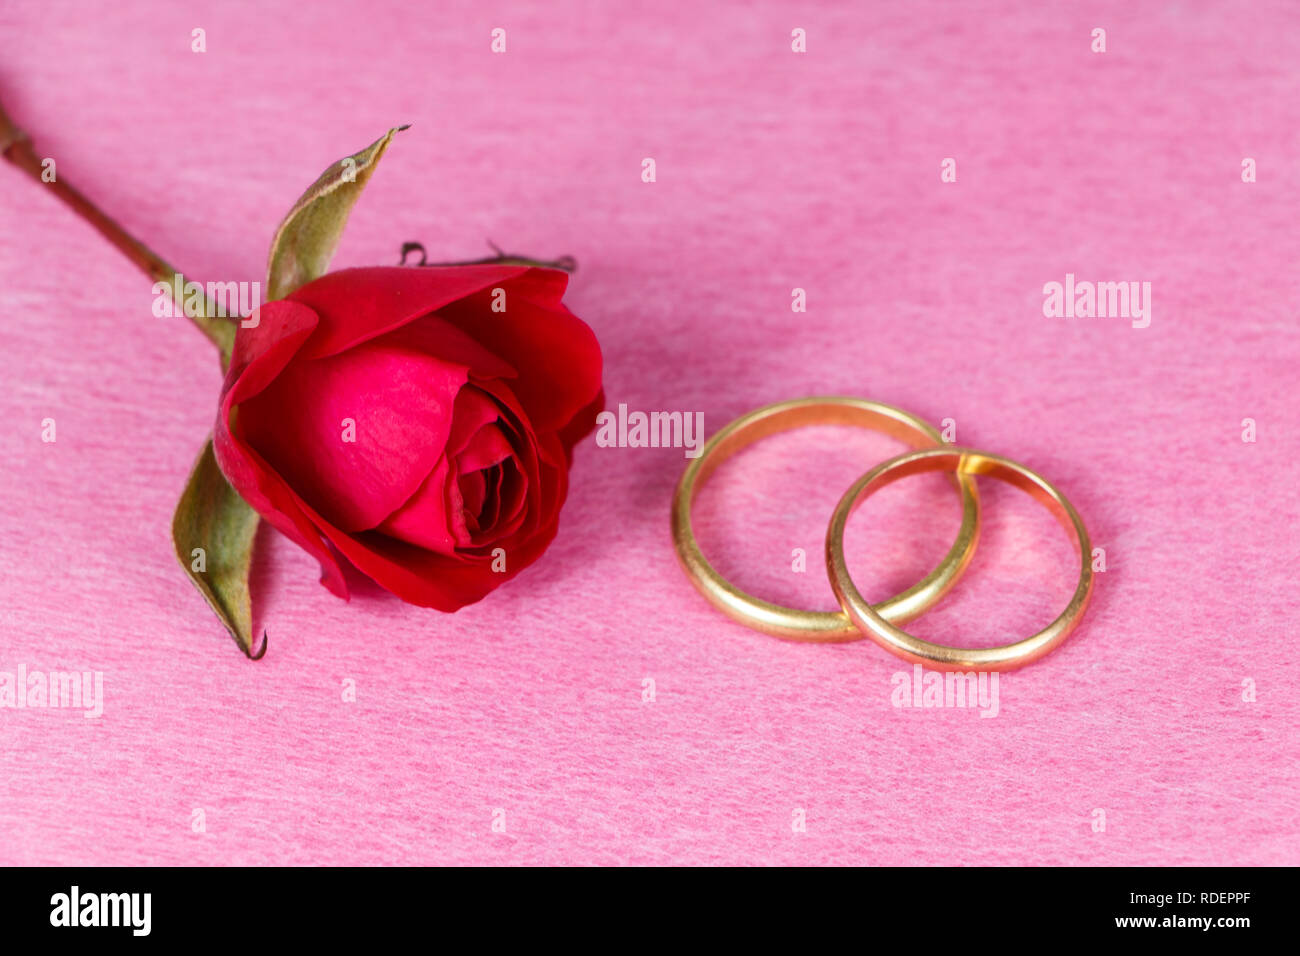 Two wedding rings in gold and red rose on a pink background Stock Photo